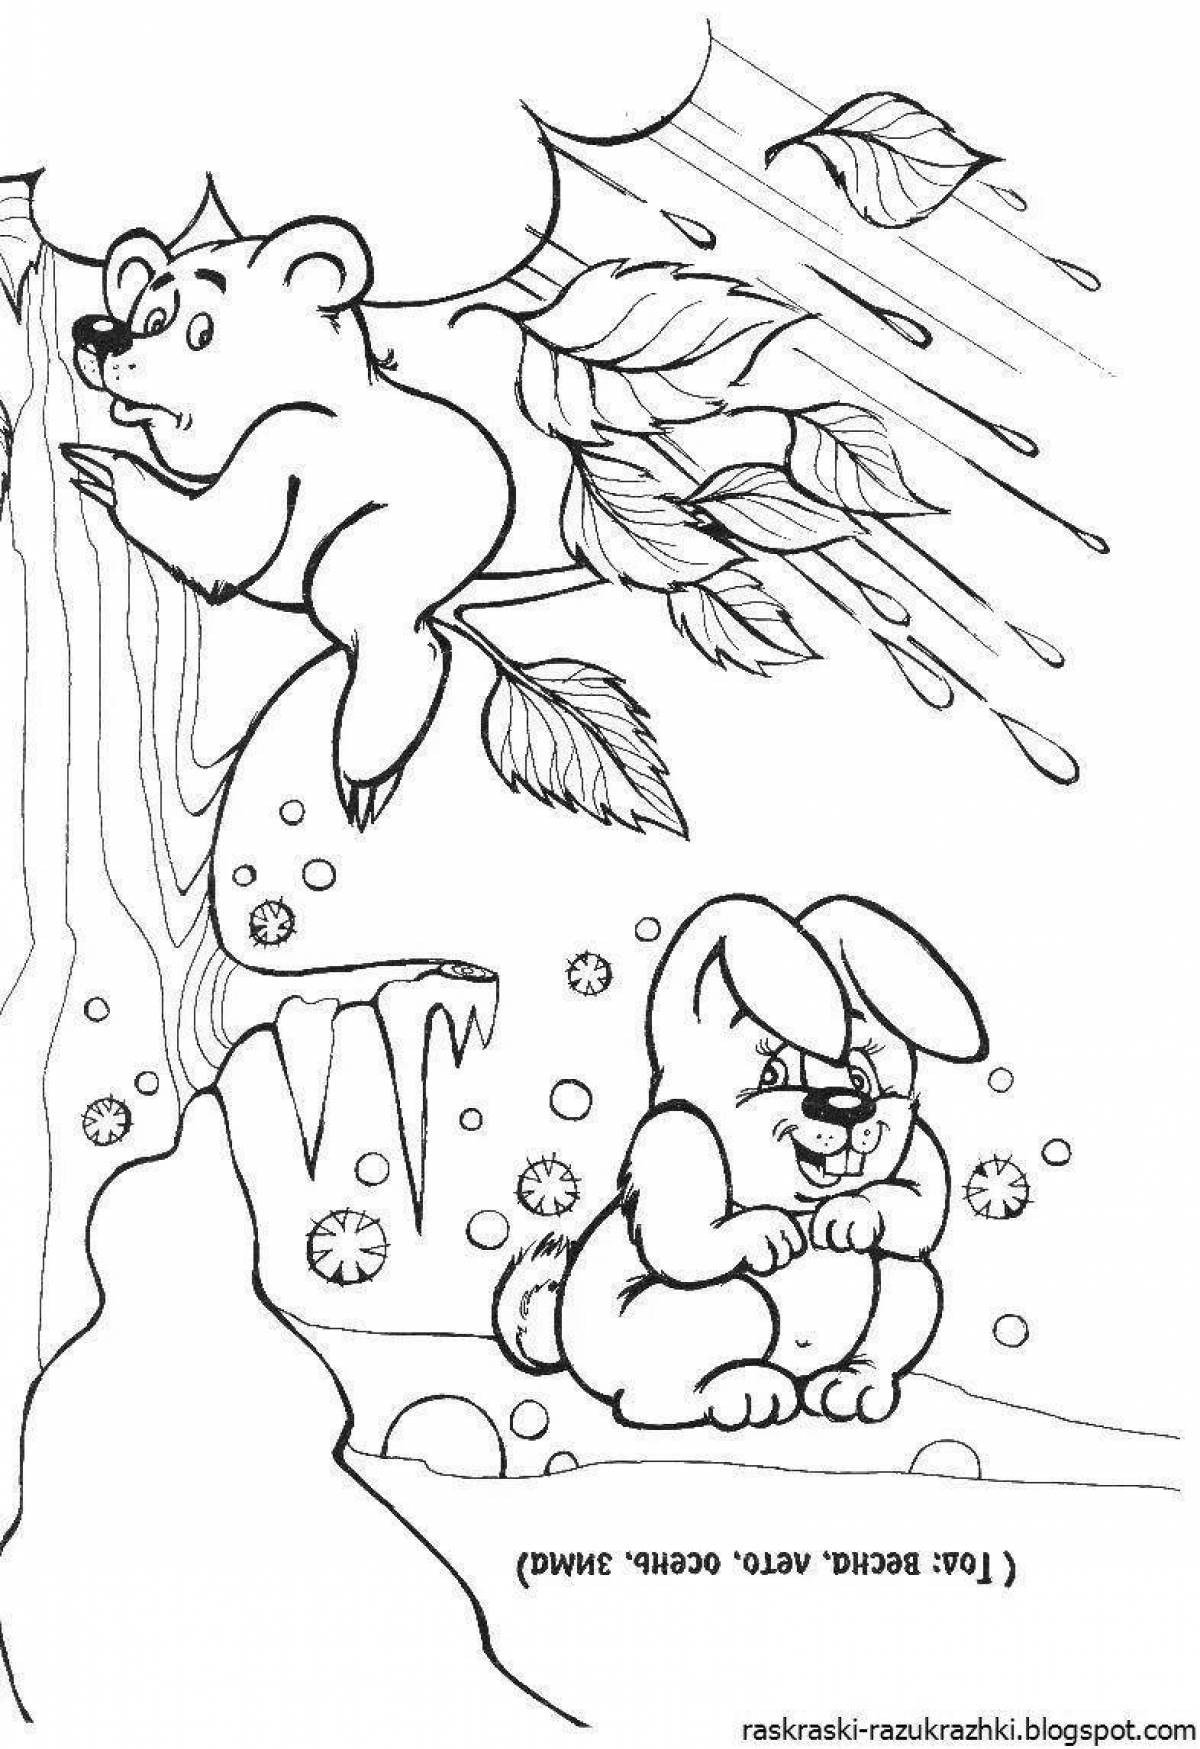 Stimulating coloring pages for toddlers